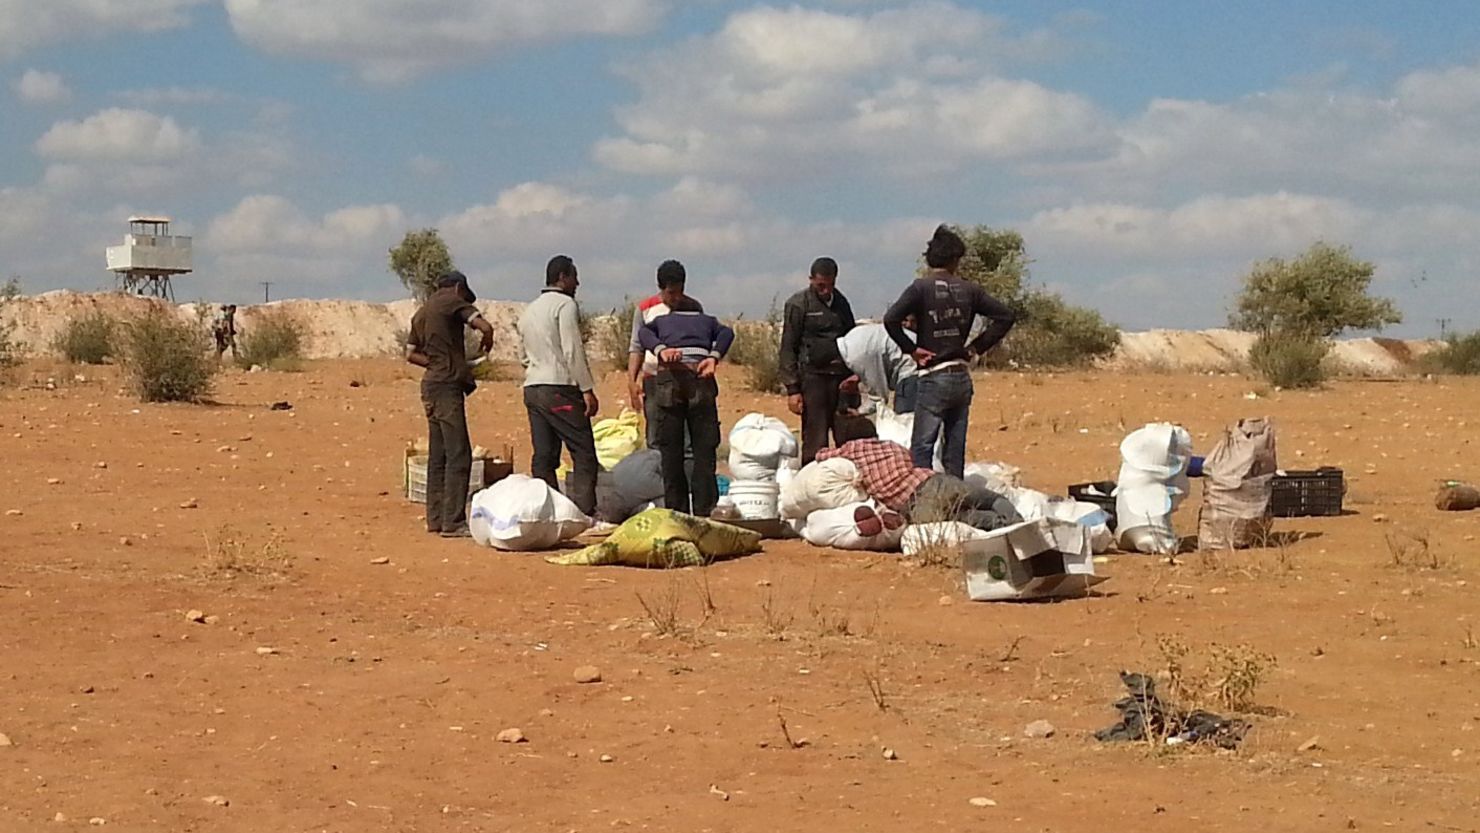 Syrians watch their belongings near the Syria-Turkey border as they try to cross illegally into Turkey on September 7.